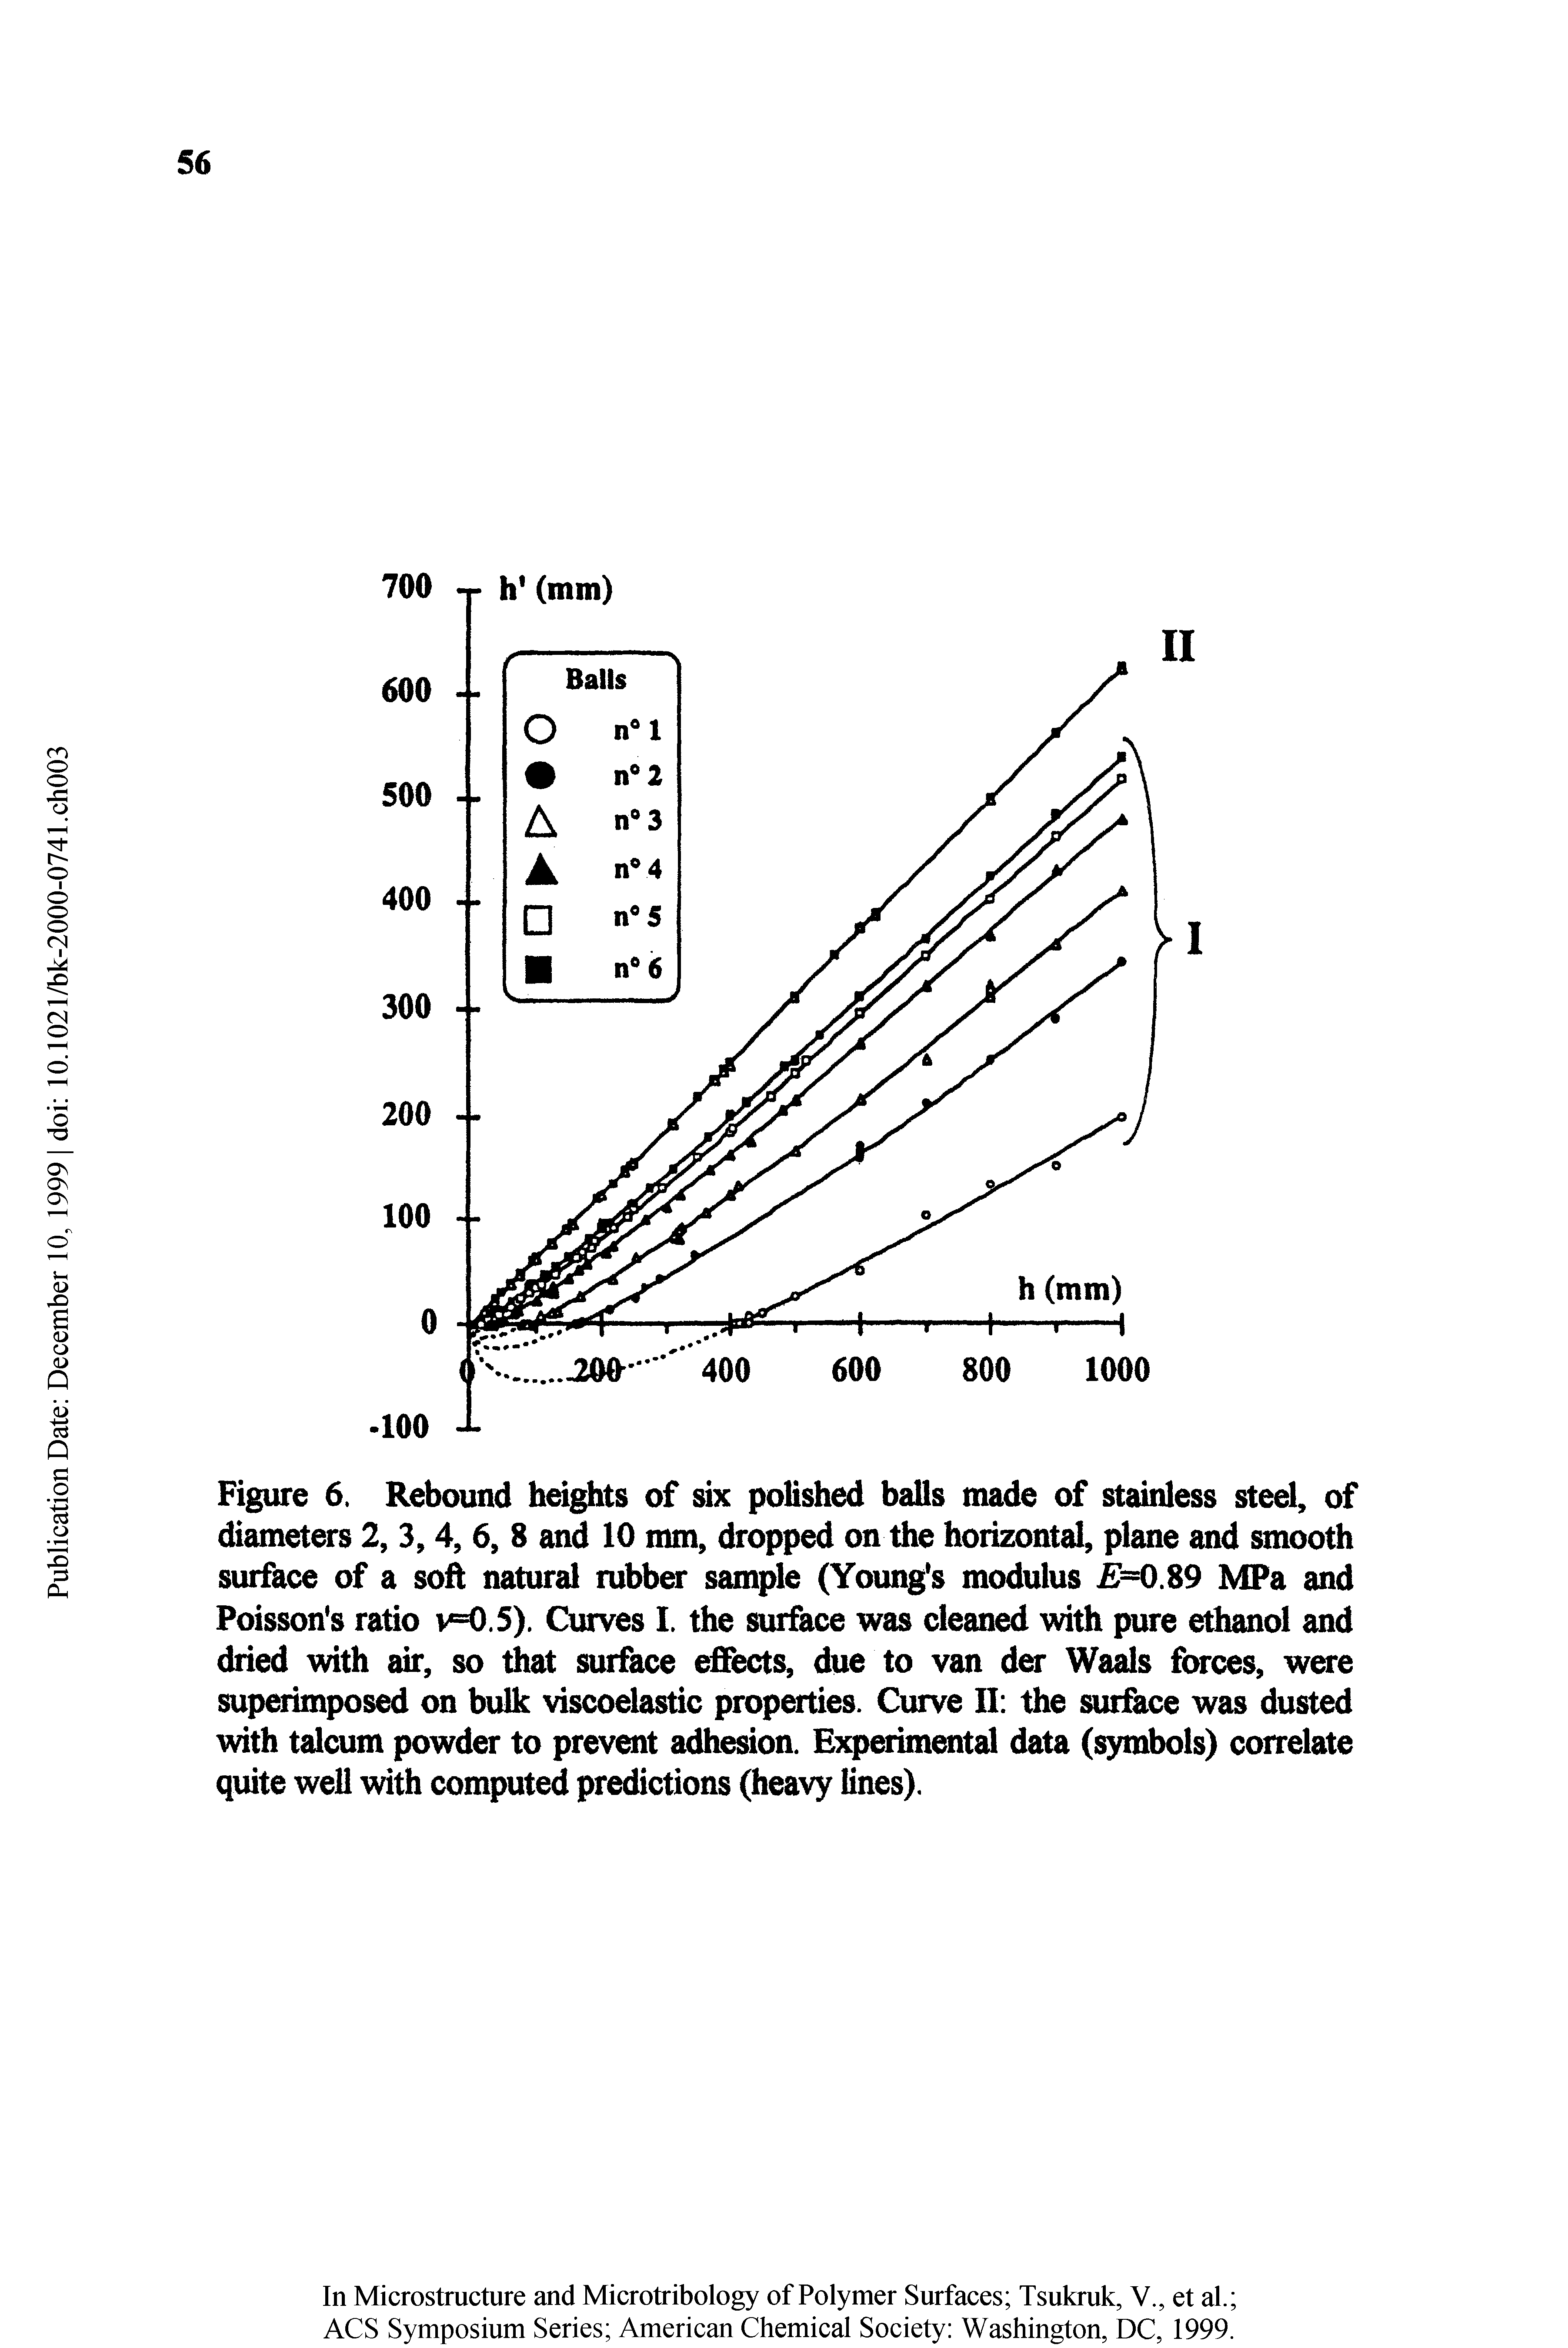 Figure 6. Rebound hdghts of six polished balls made of stainless steel, of diameters 2, 3,4, 6, 8 and 10 mm, dropped on the horizontal, plmie and smooth surface of a soft natural rubber sample (Young s modulus iM).89 MPa and Poisson s ratio v=0.5). Curves I. the s ace was cleai with pure ethanol and dried with air, so that sur ce effects, due to van der Waals forces, were superimposed on bulk viscoelastic propmies. Curve II the sur ce was dusted with talcum powder to prevent adhesion. Experimental data (symbols) correlate quite well mth computed predictions (heavy lines).